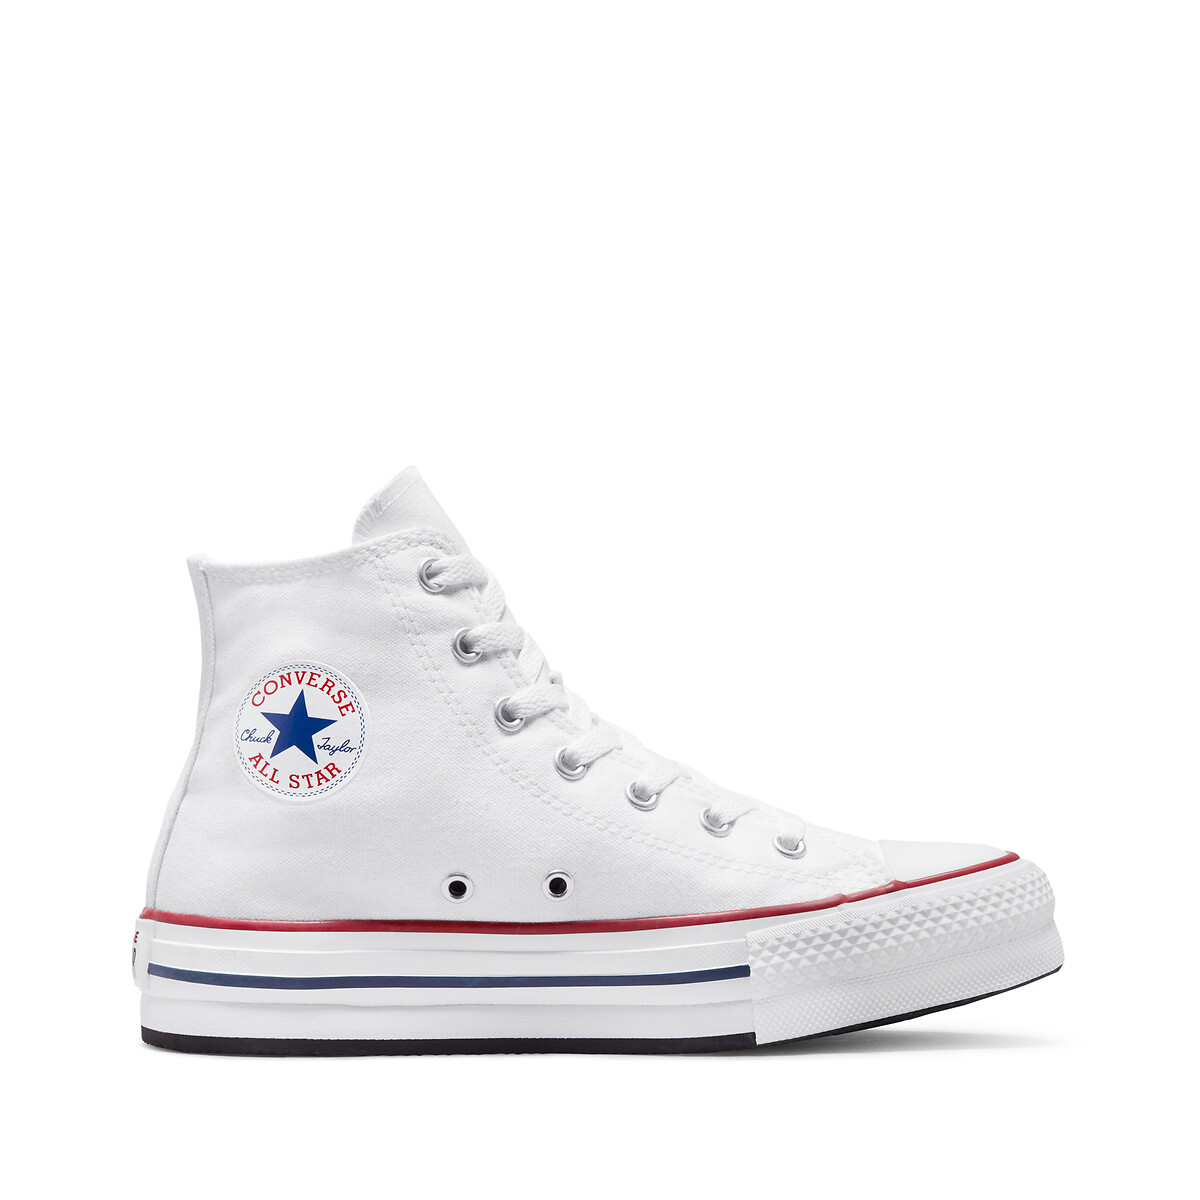 La all weiss eva chuck | taylor Sneakers Redoute lift Converse star